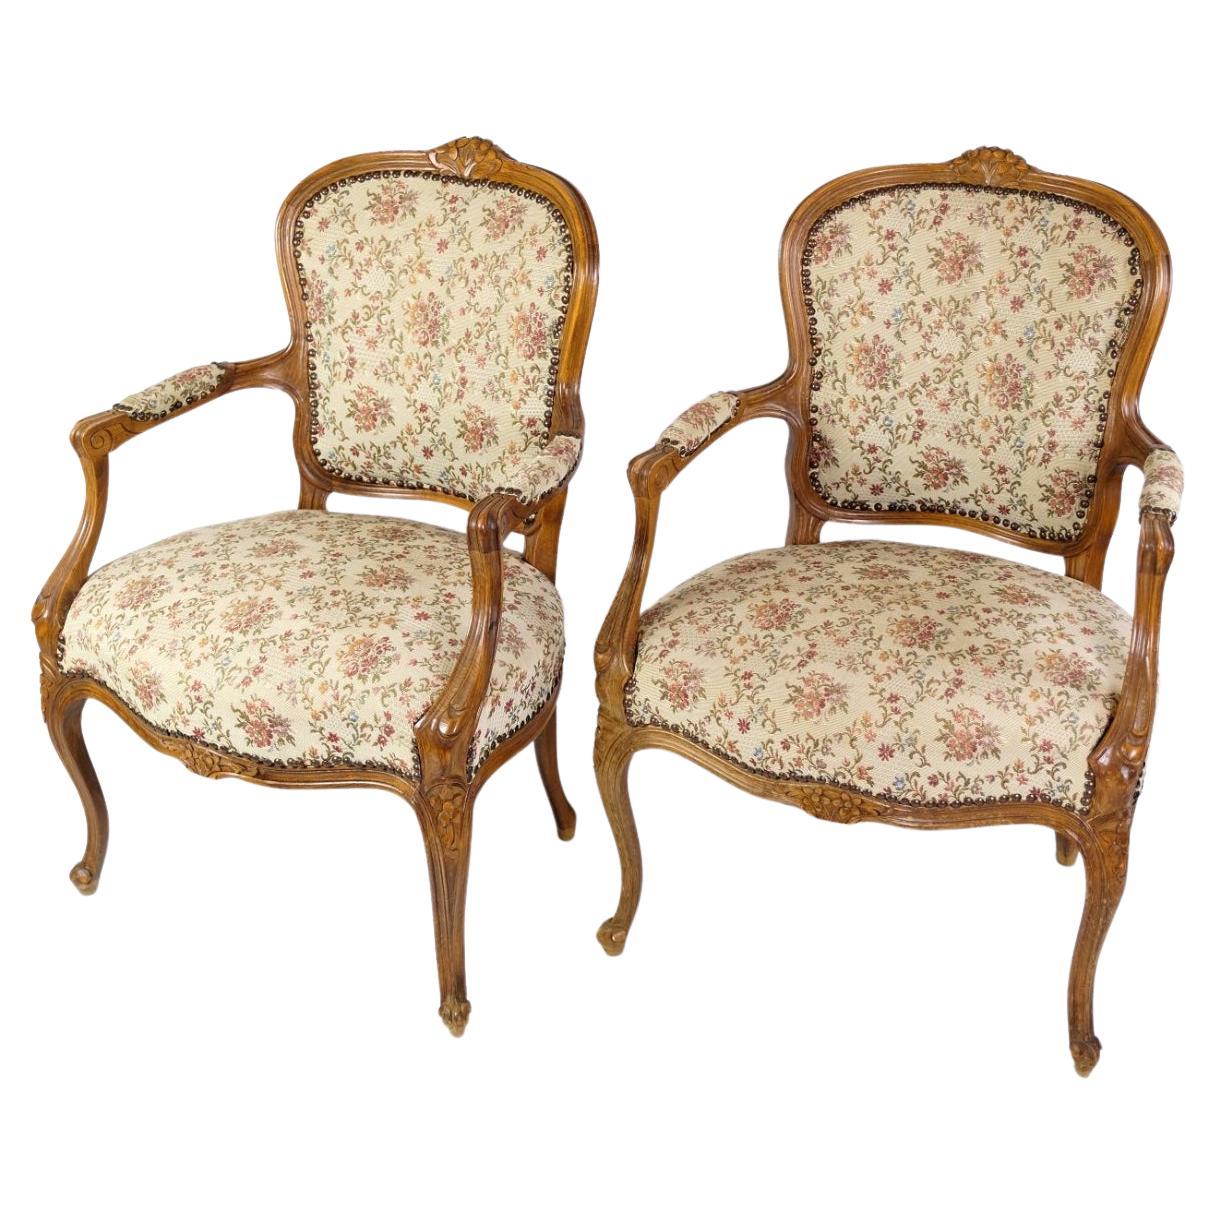 Pair of Neo-Rococo Armchairs Made In Light Wood With Decorated Fabric From 1930s For Sale